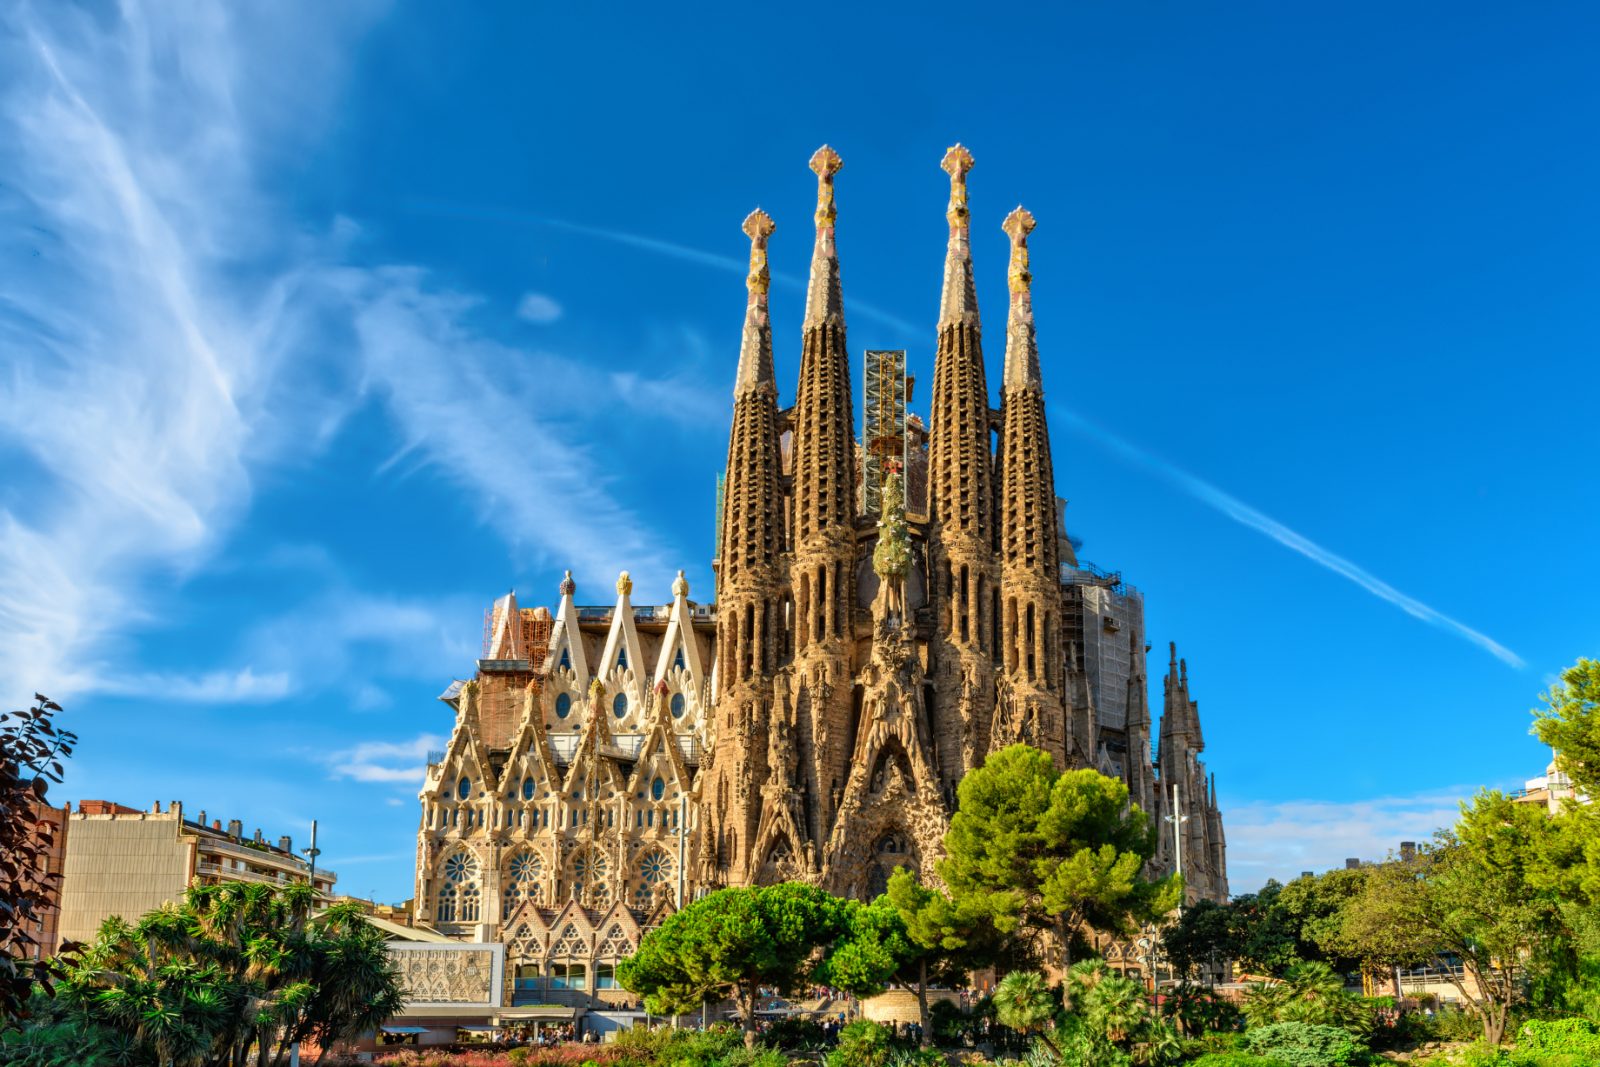 If You Can Name Just 12/20 Countries by Their Famous Landmark, I’ll Be Really Impressed La Sagrada Familia in Barcelona, Spain